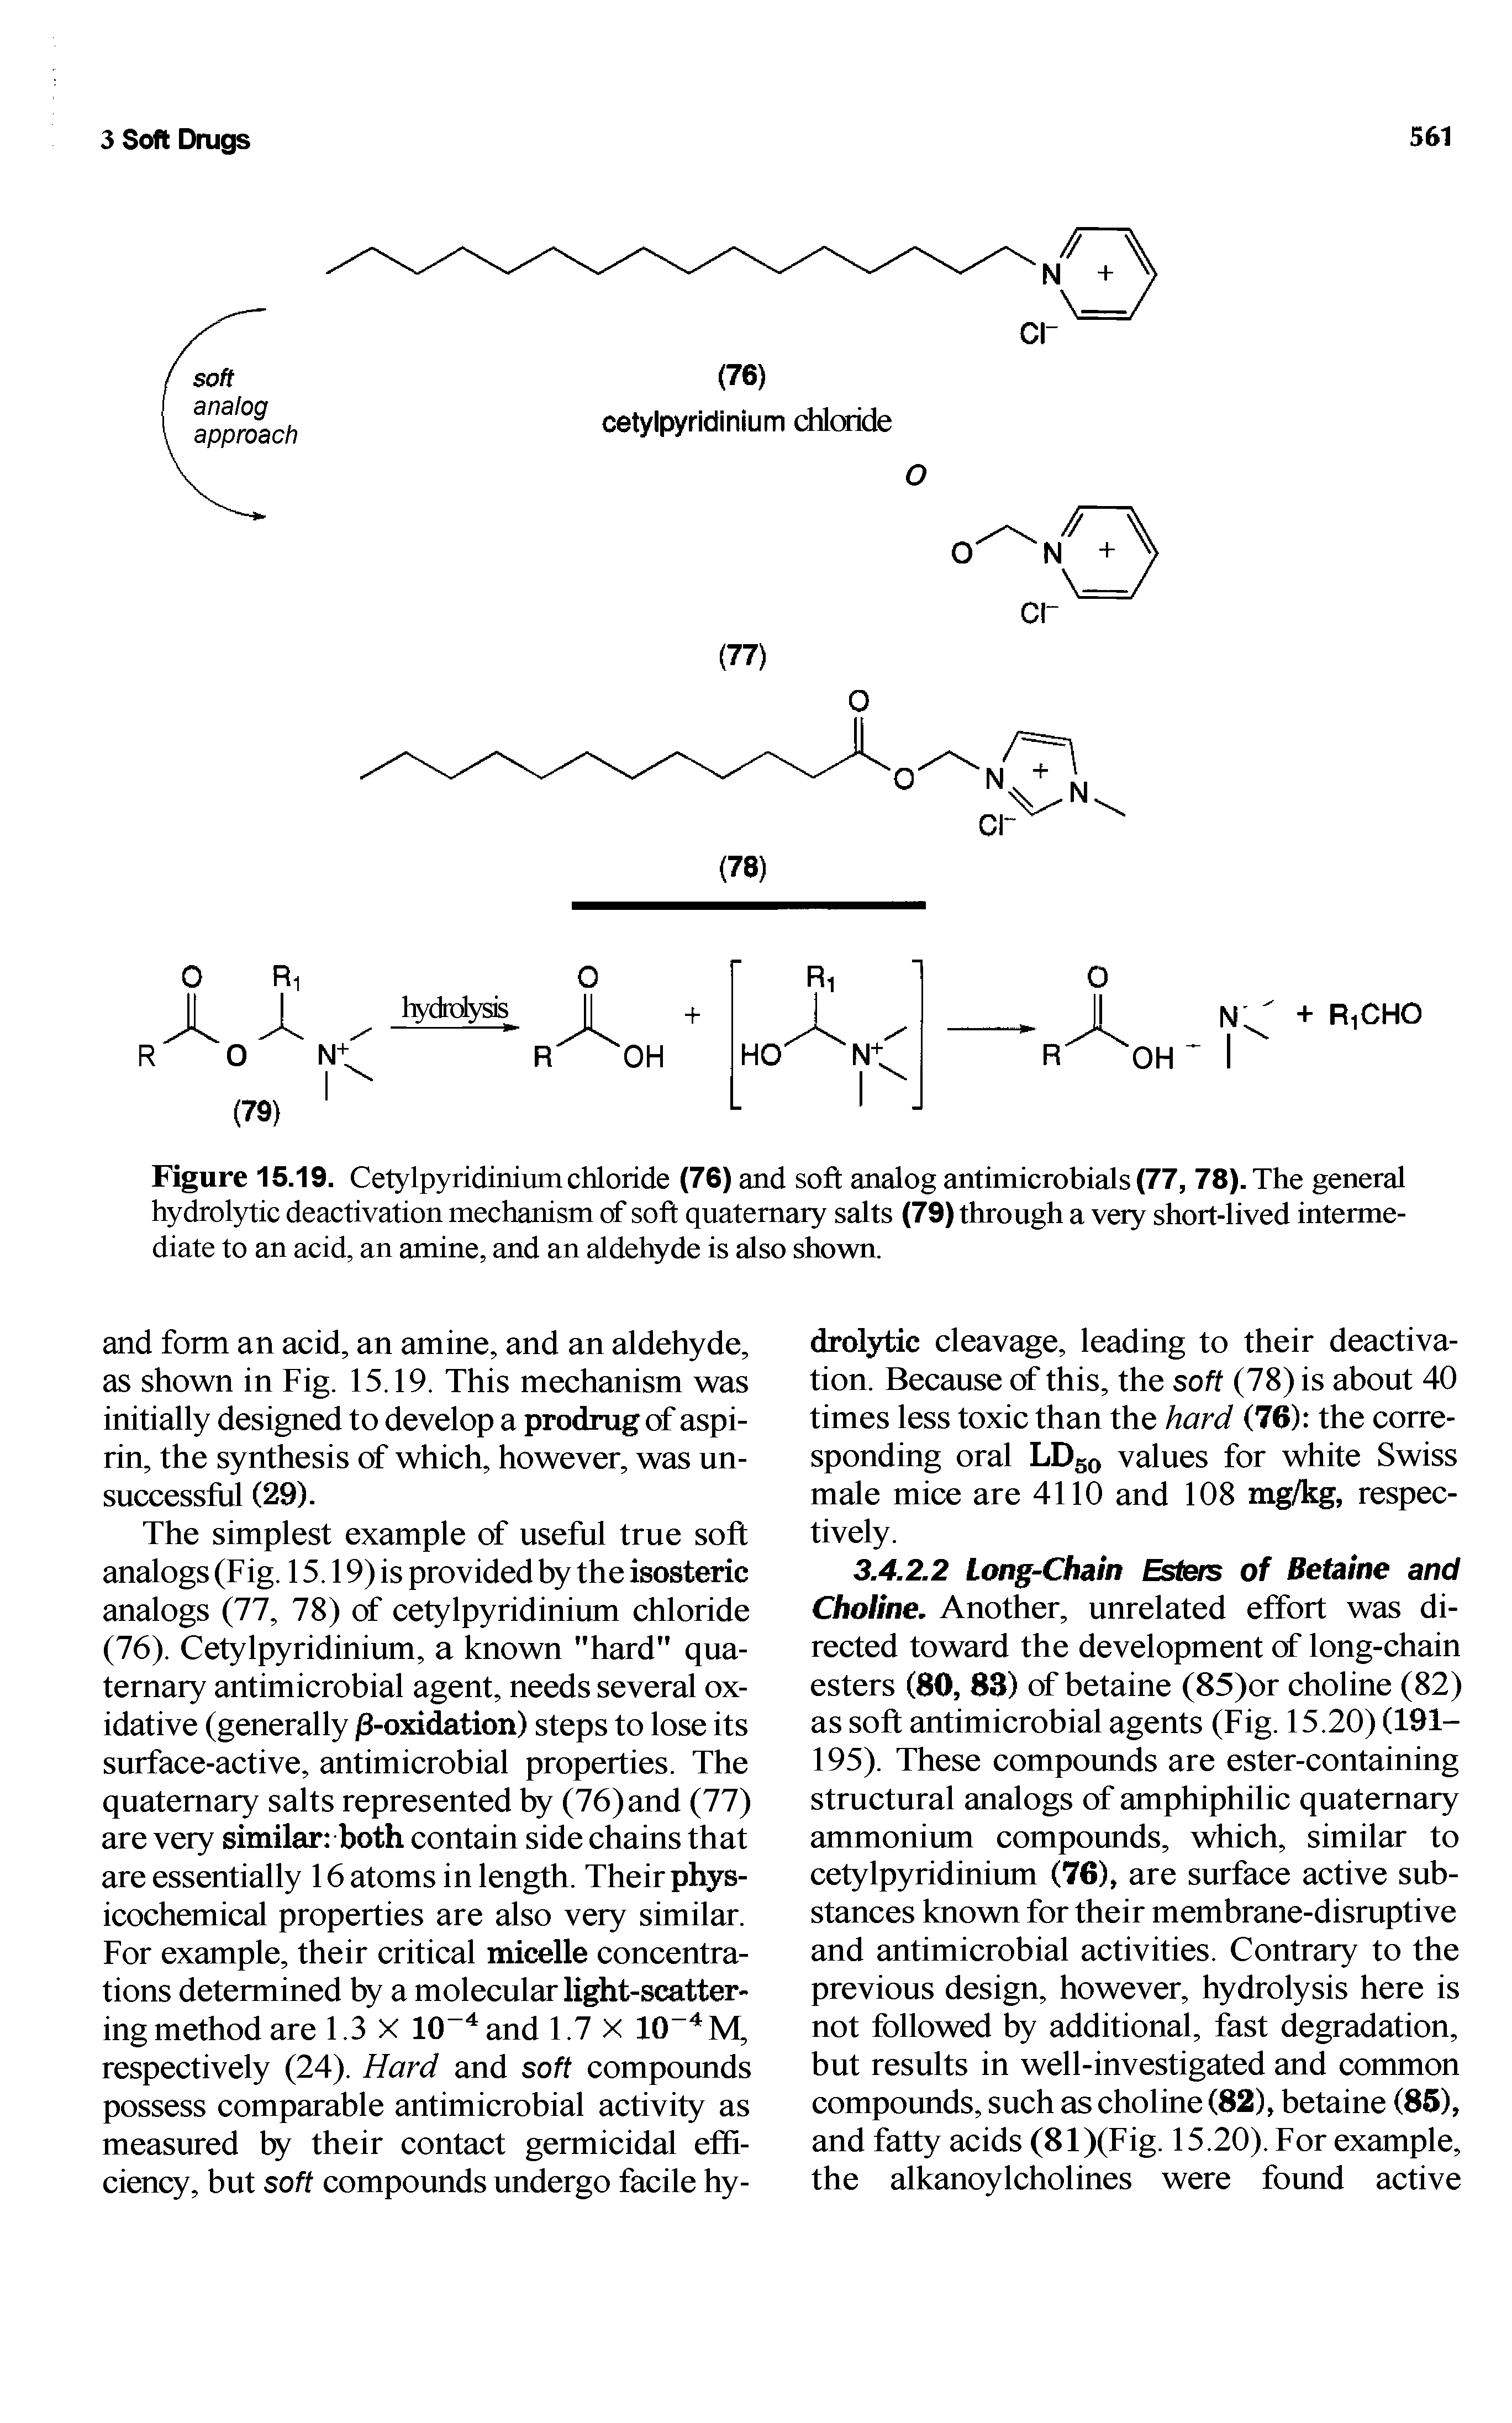 Figure 15.19. Cetylpyridinium chloride (76) and soft analog antimicrobials (77, 78). The general hydrolytic deactivation mechanism of soft quaternary salts (79) through a very short-lived intermediate to an acid, an amine, and an aldehyde is also shown.